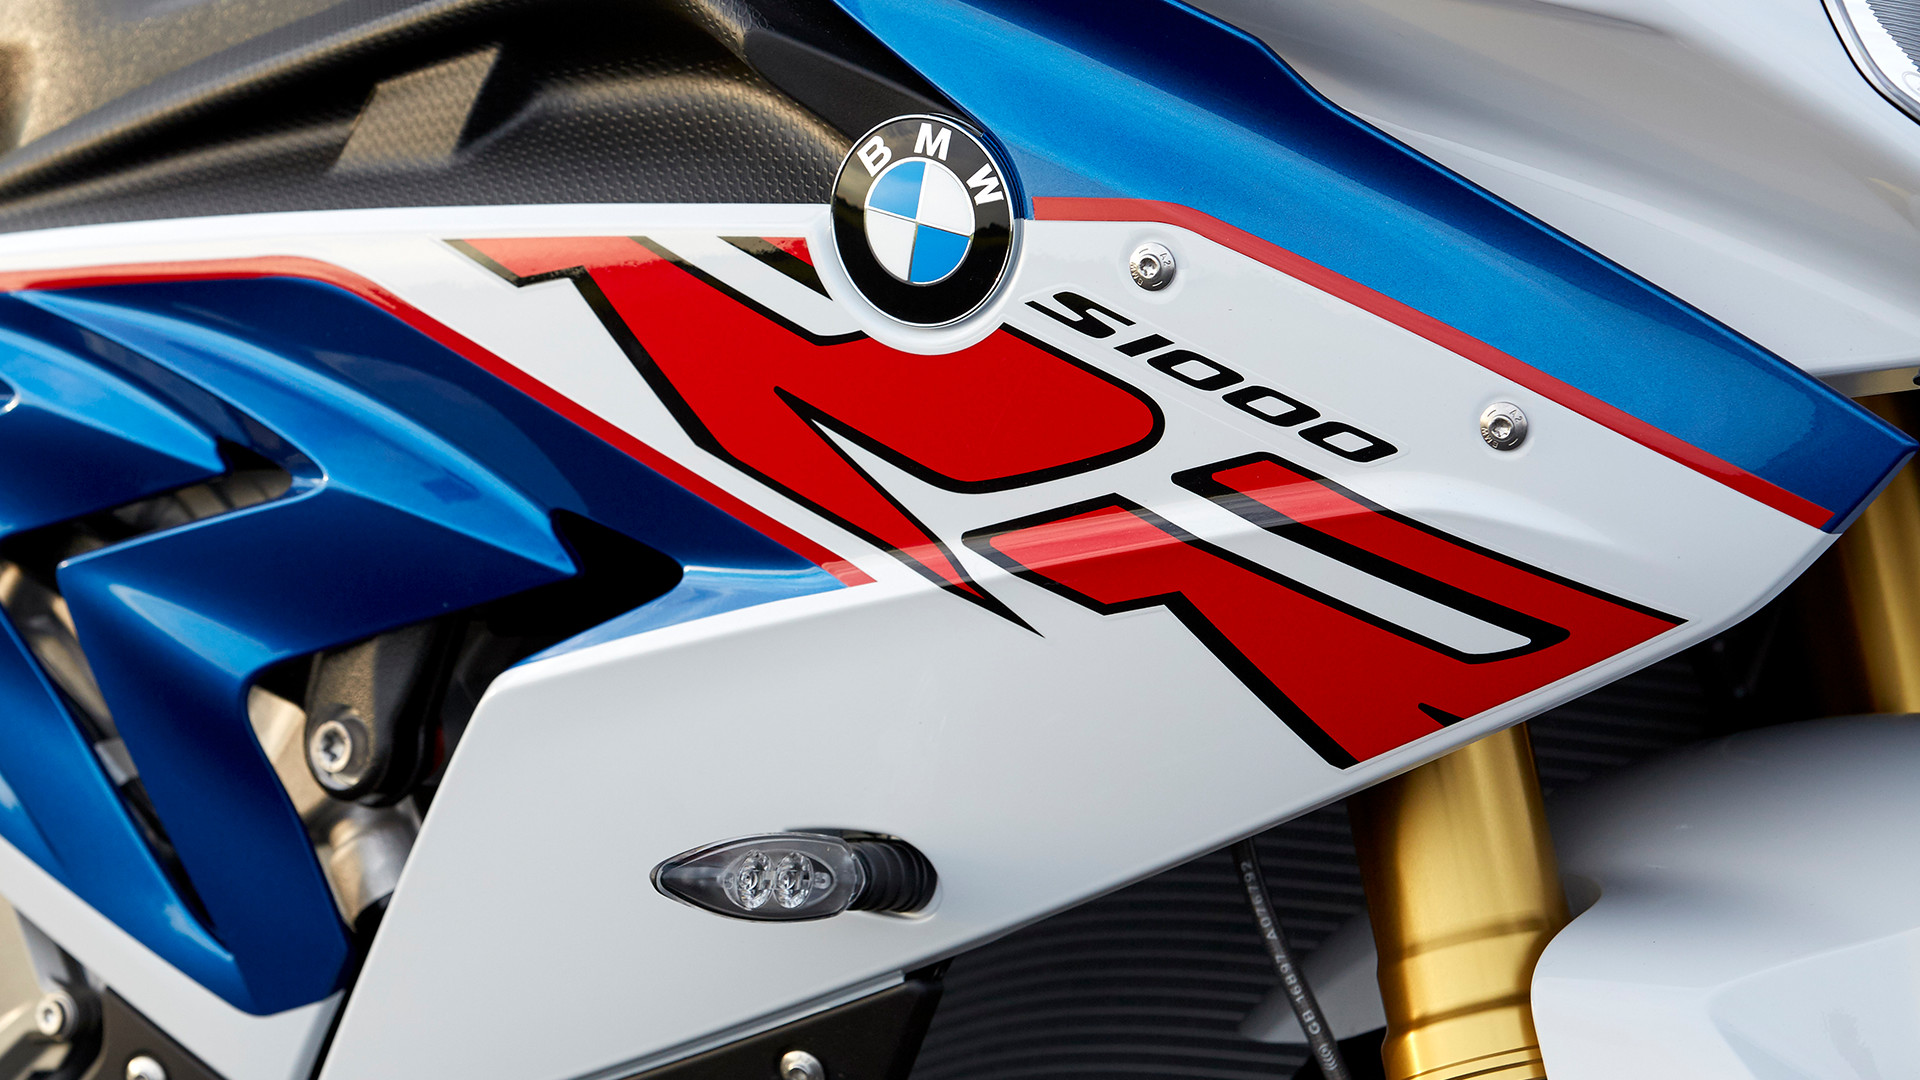 S 1000 RR | Southern California BMW Motorcycle Dealers